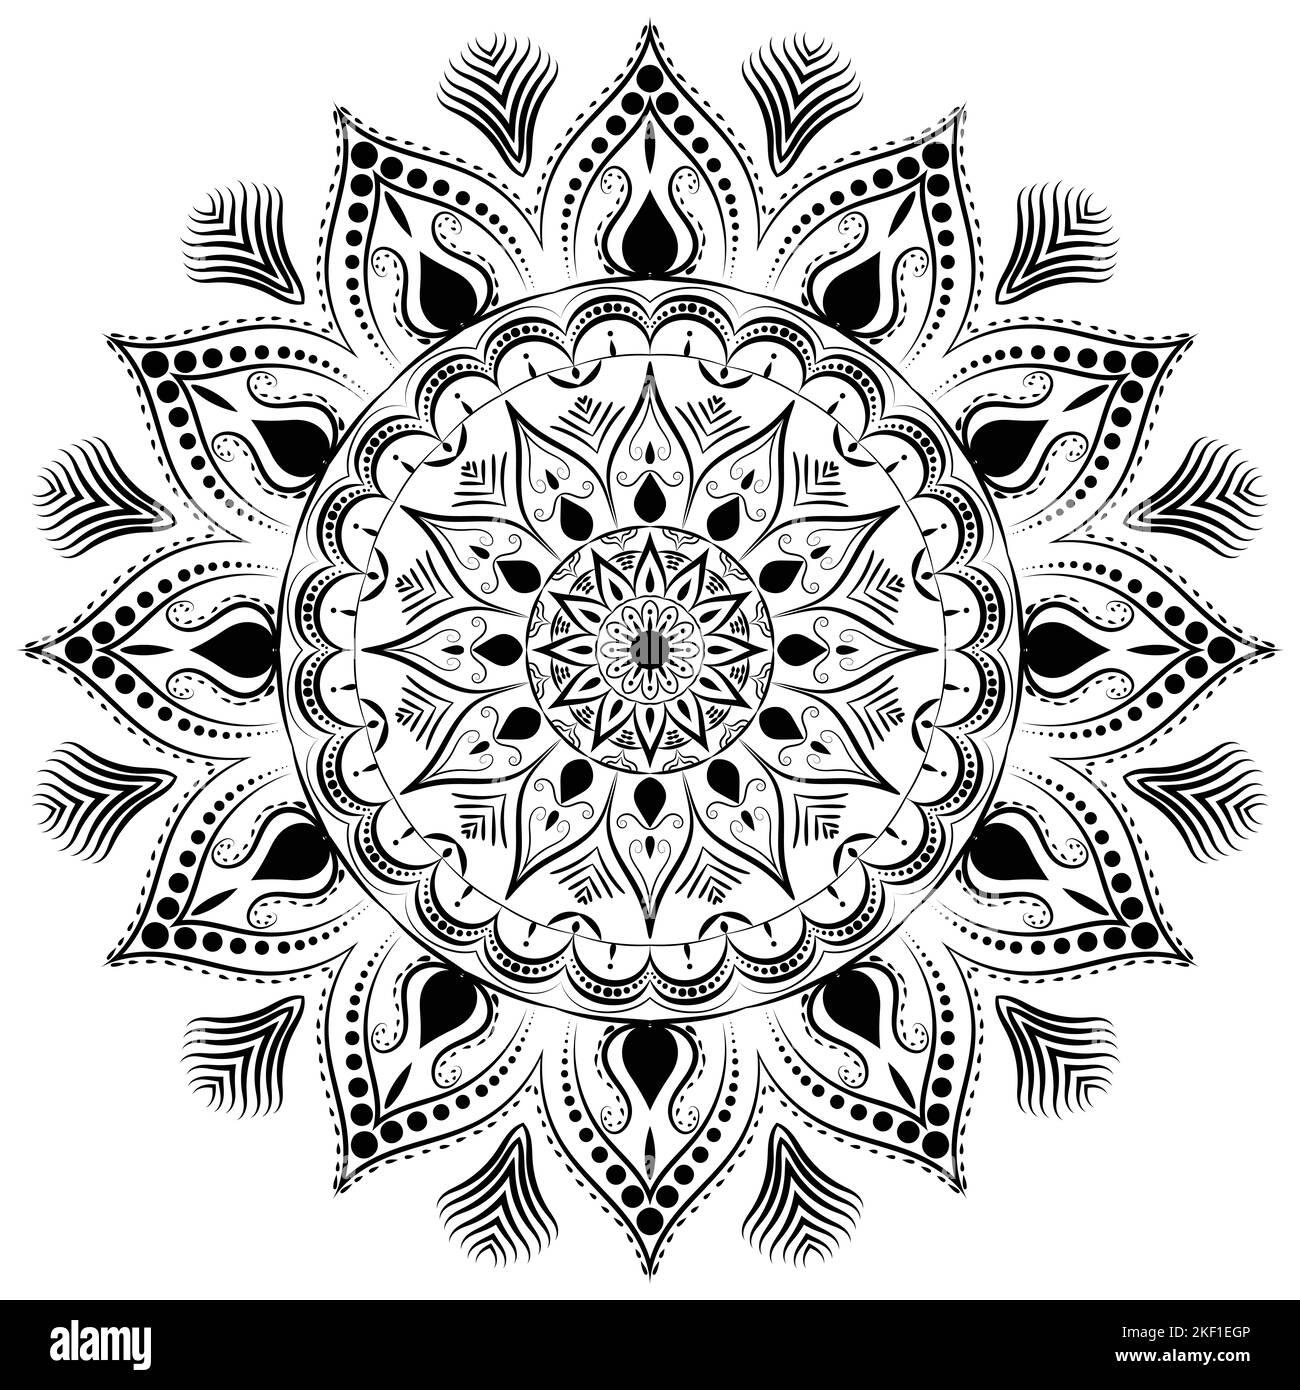 Beautiful Indian pattern floral mandala art isolated on a white background, decoration elements for meditation poster or banner, tattoo art Stock Photo